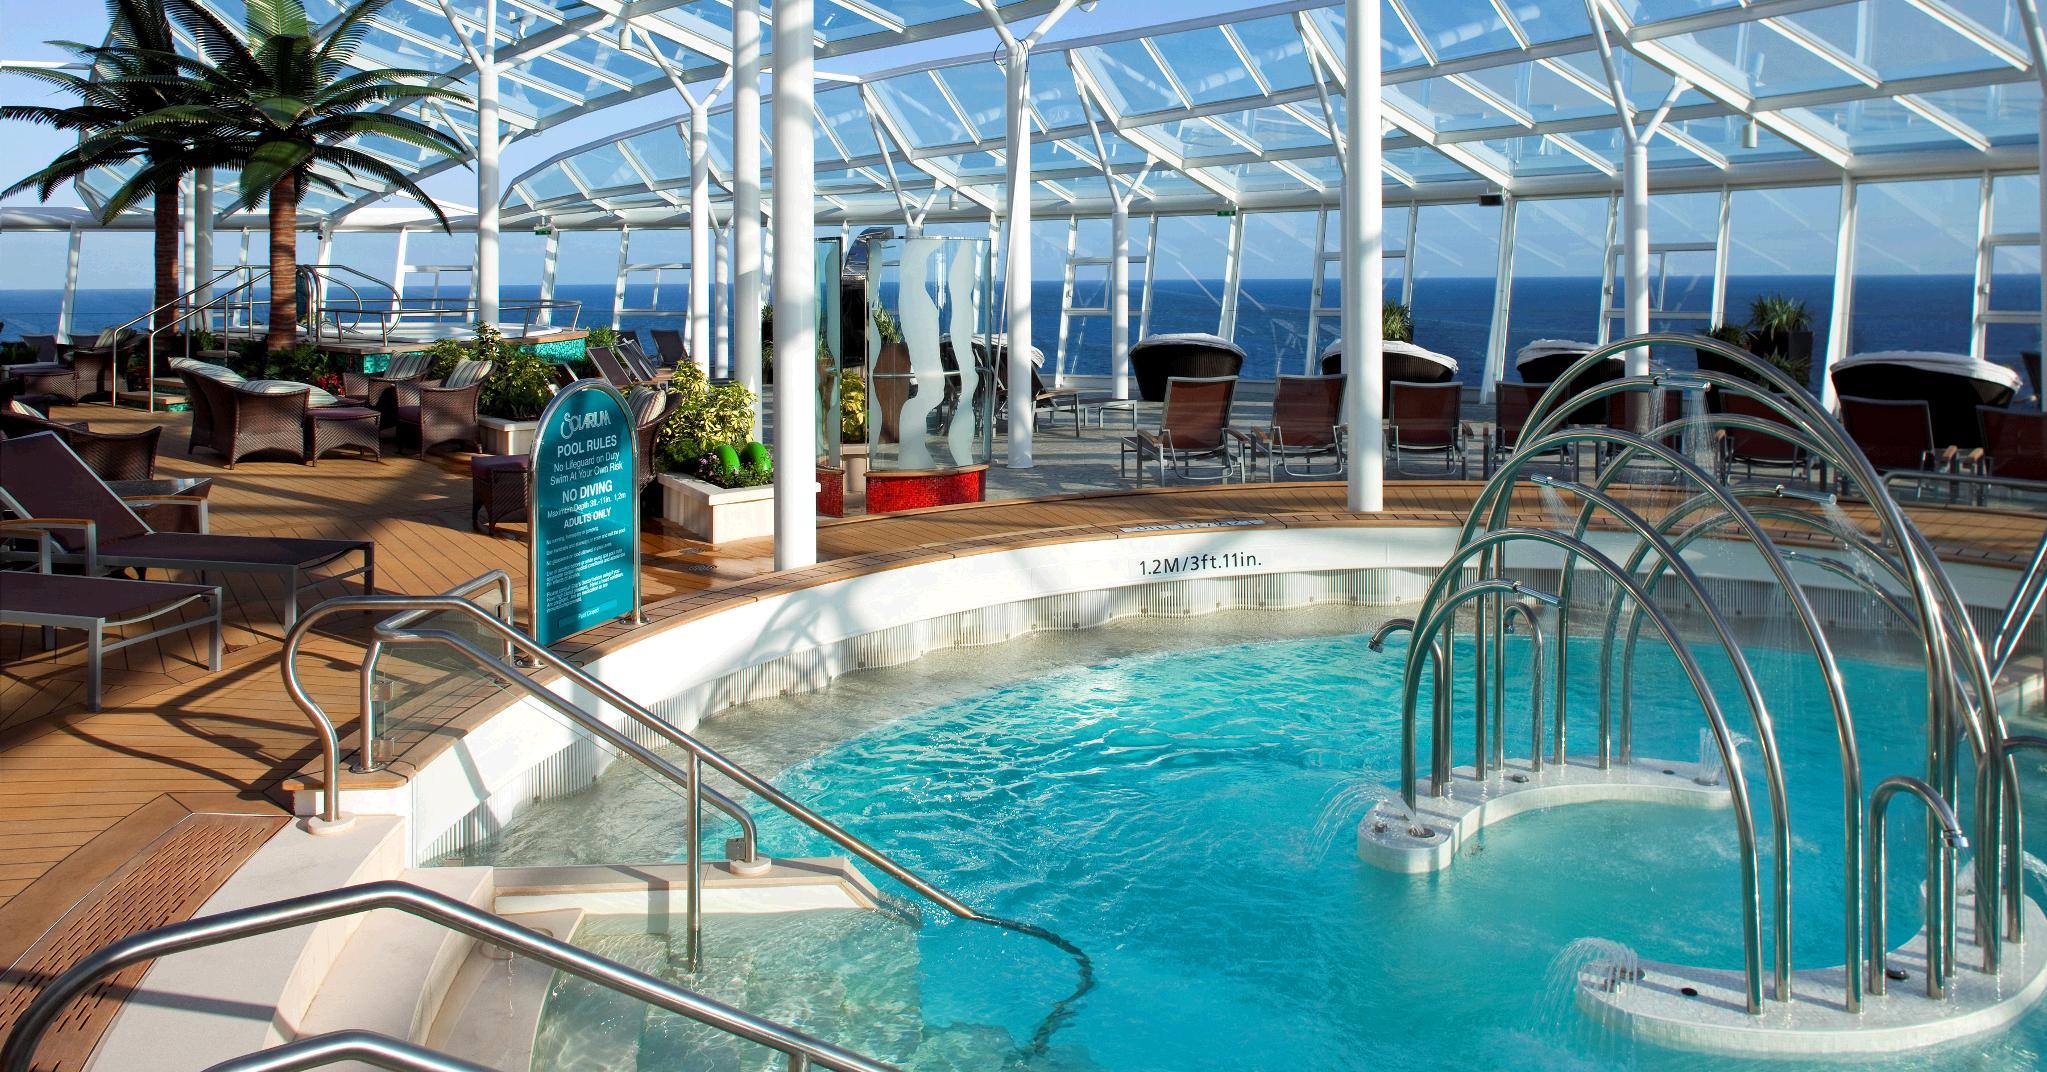 25 Tips to Save BIG on Your Next Cruise - pool